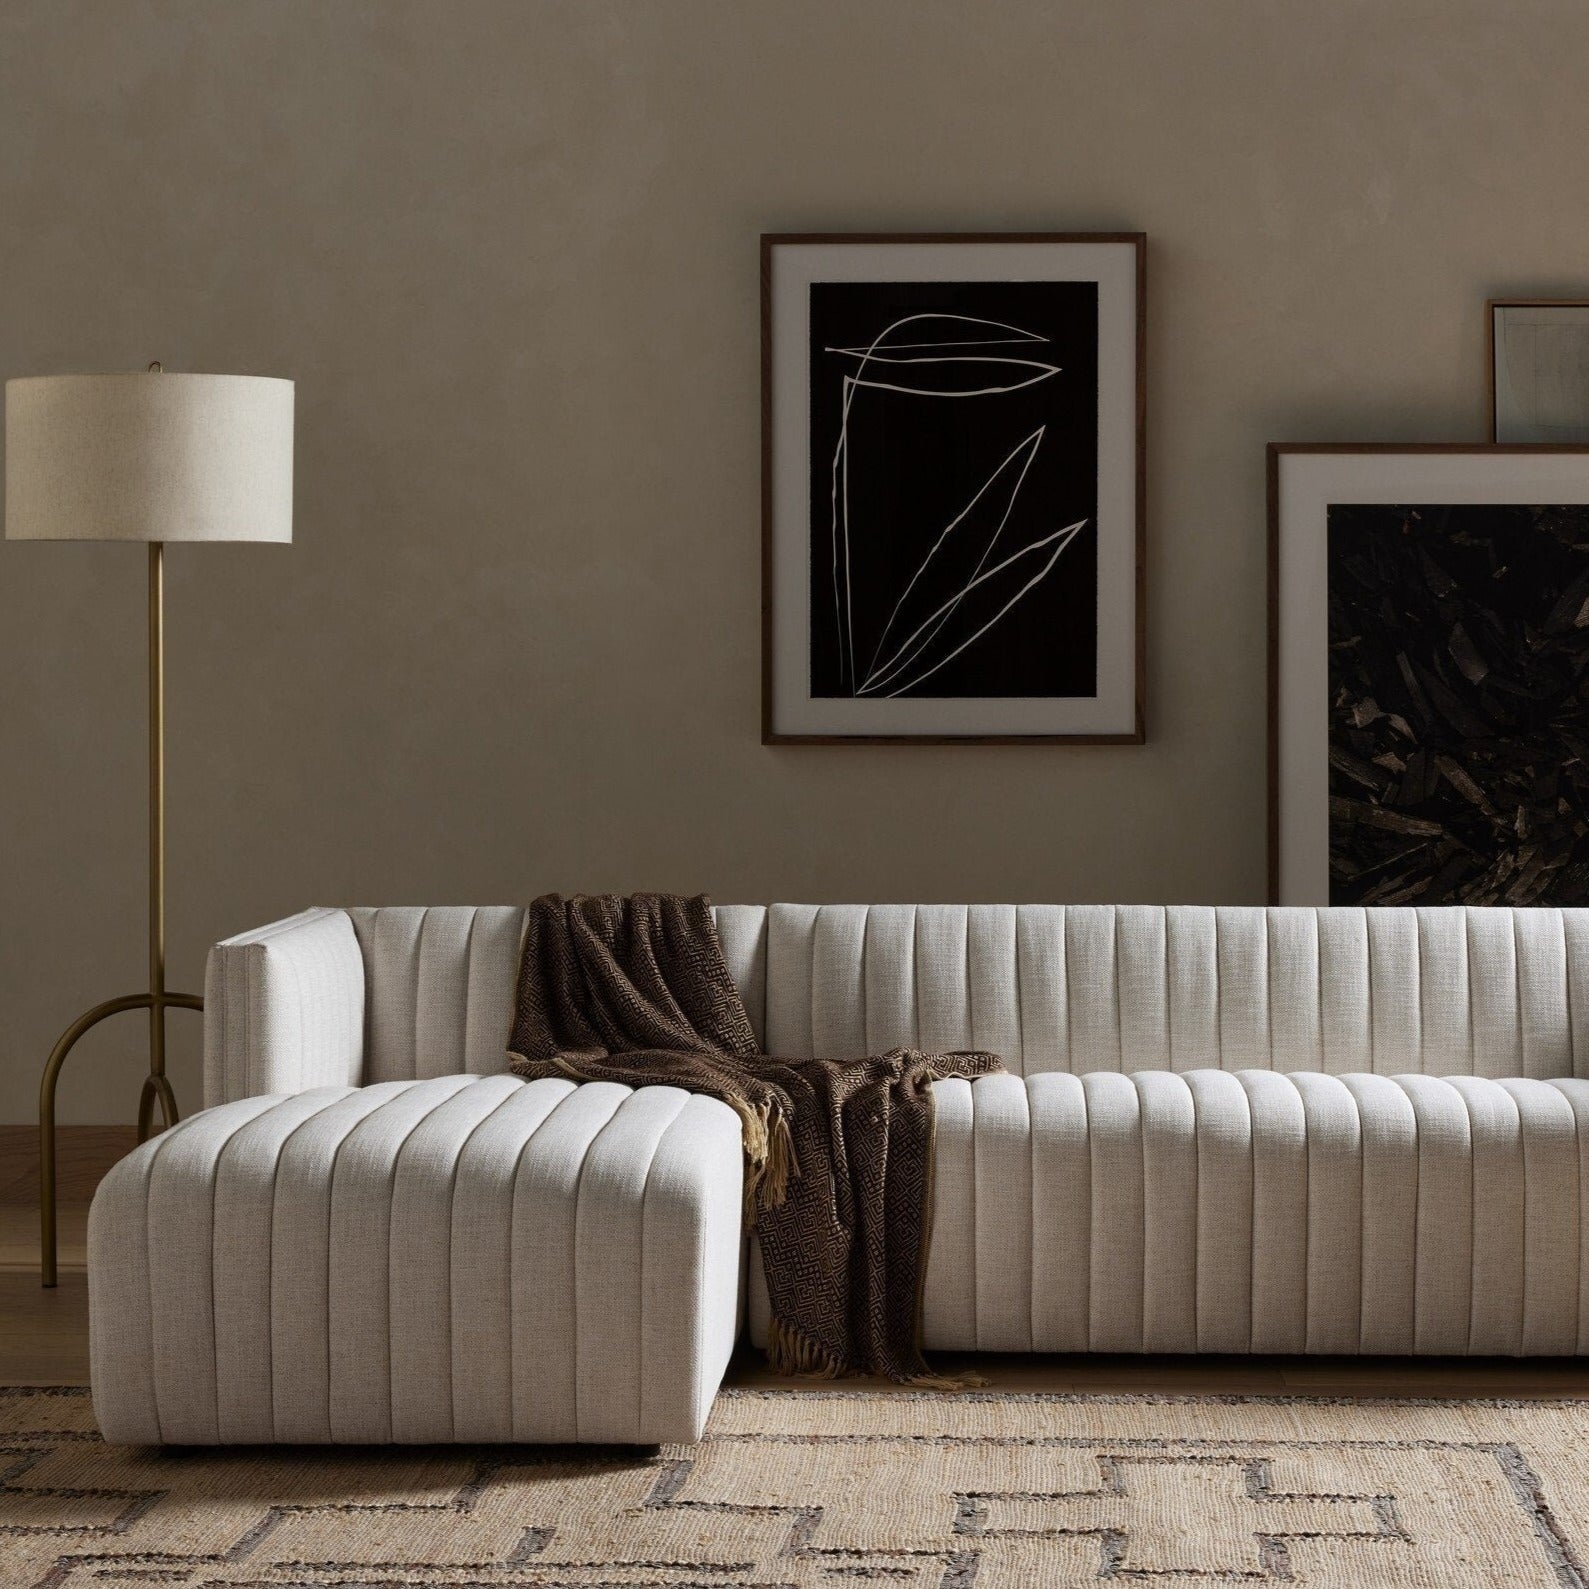 Augustine 2-Pc Sectional